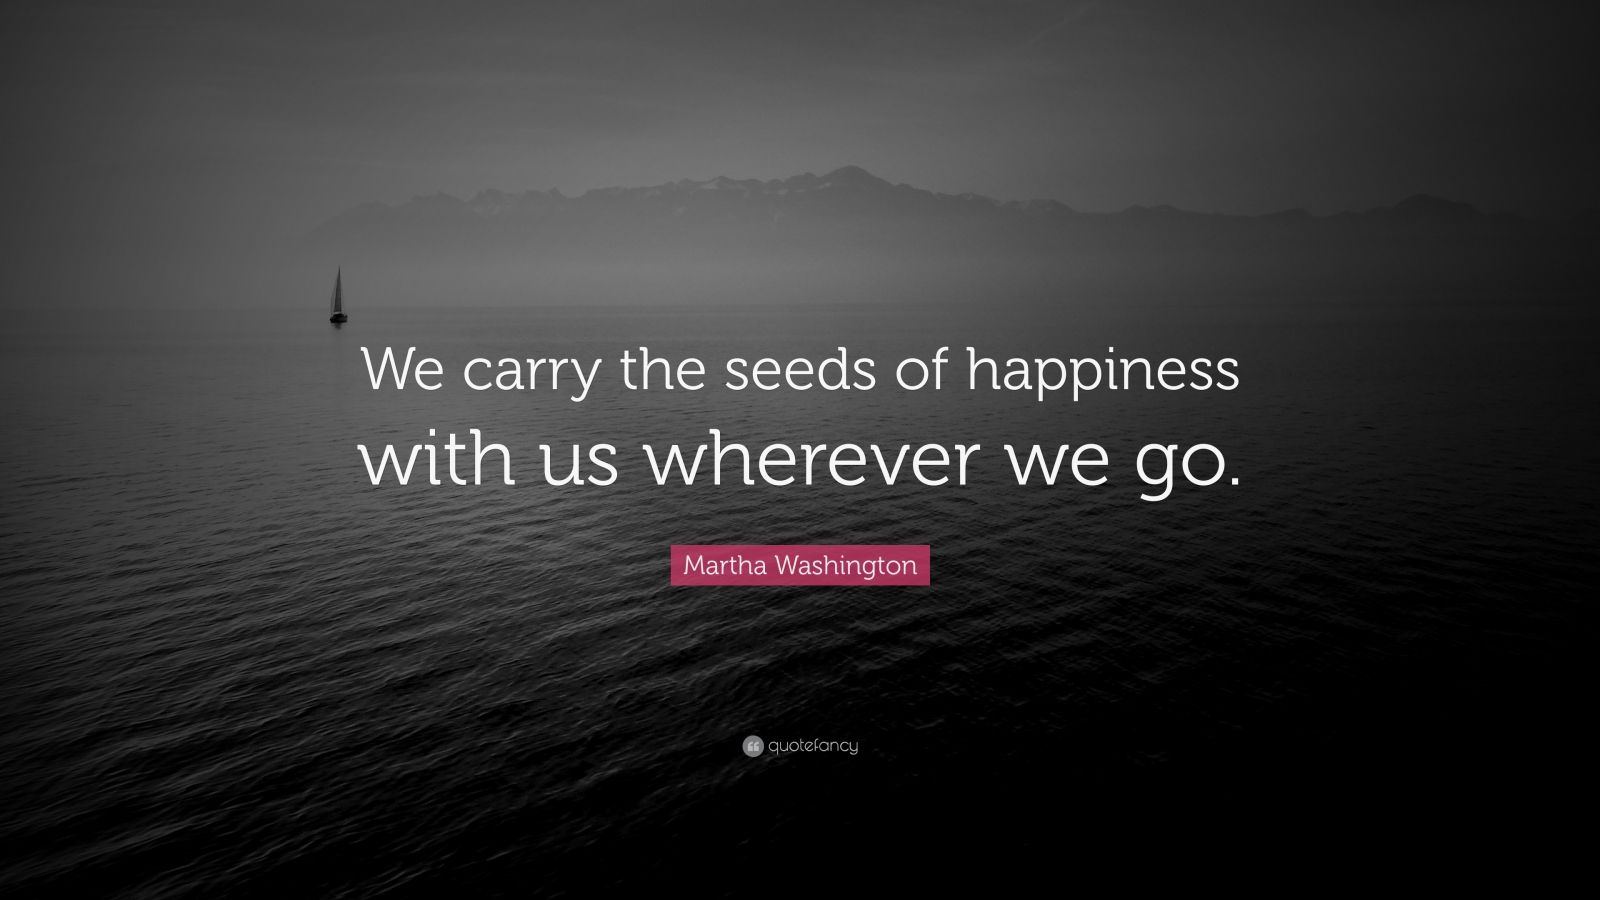 Martha Washington Quote: "We carry the seeds of happiness with us wherever we go." (7 wallpapers ...